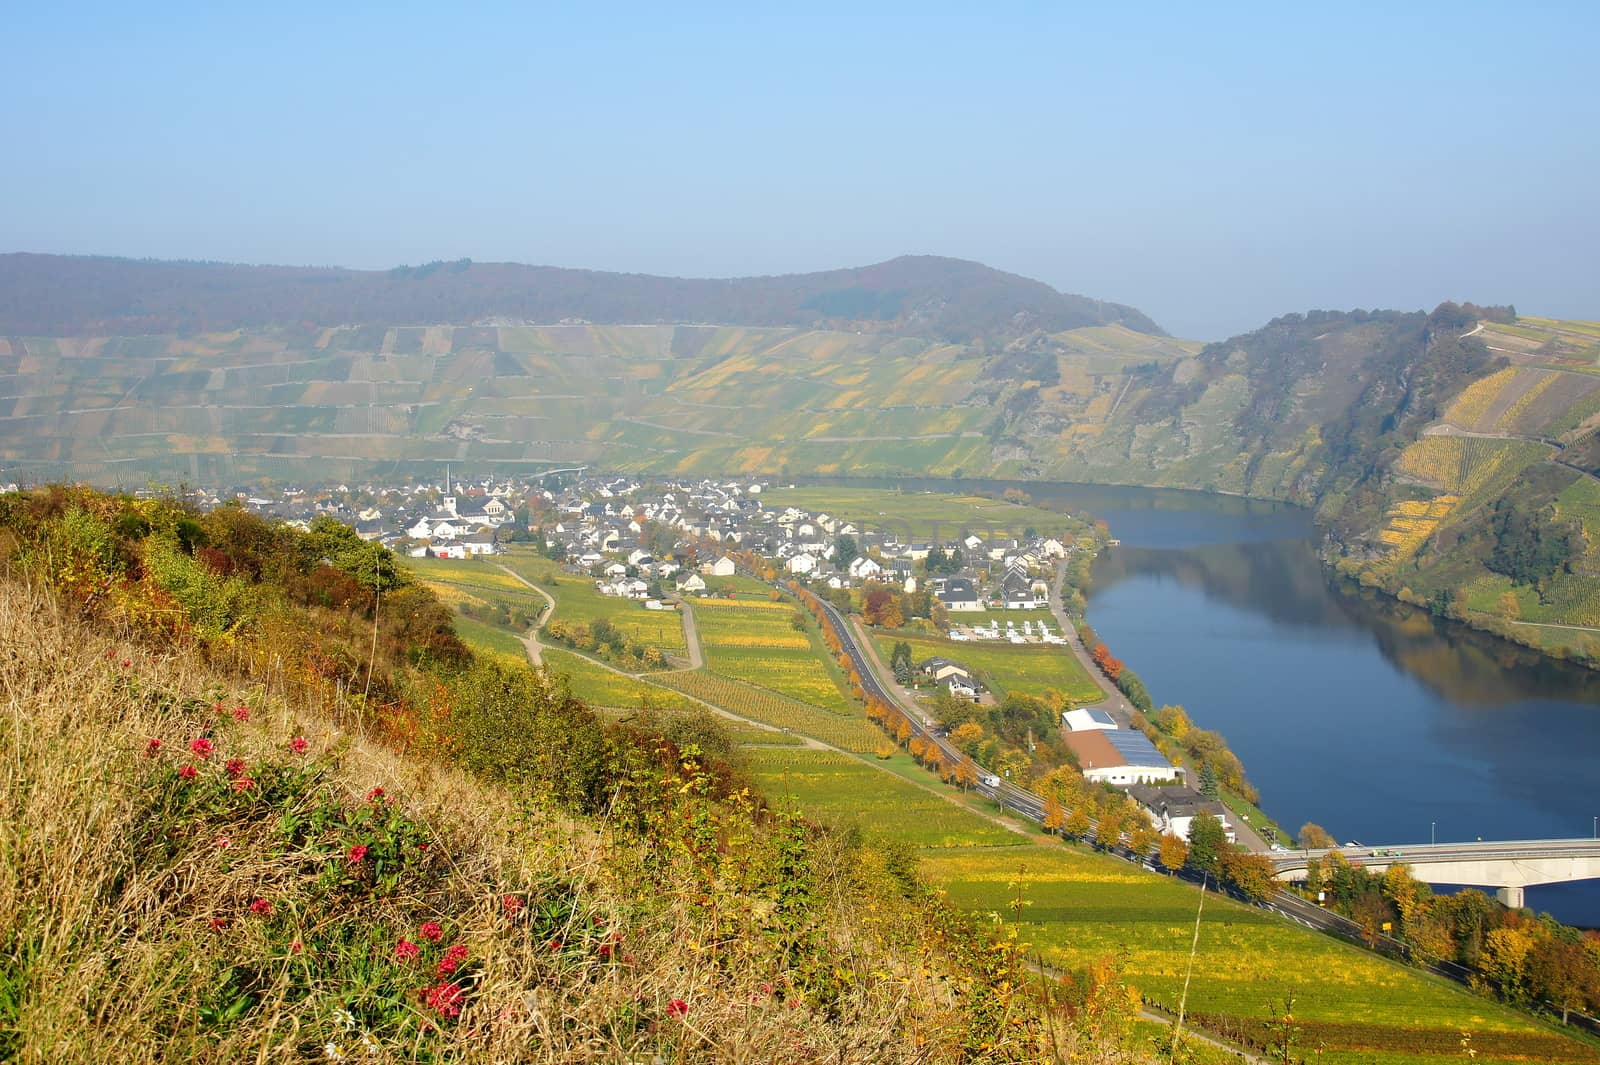 Moselle valley with the wine village Piesport left, right the Moselloreley